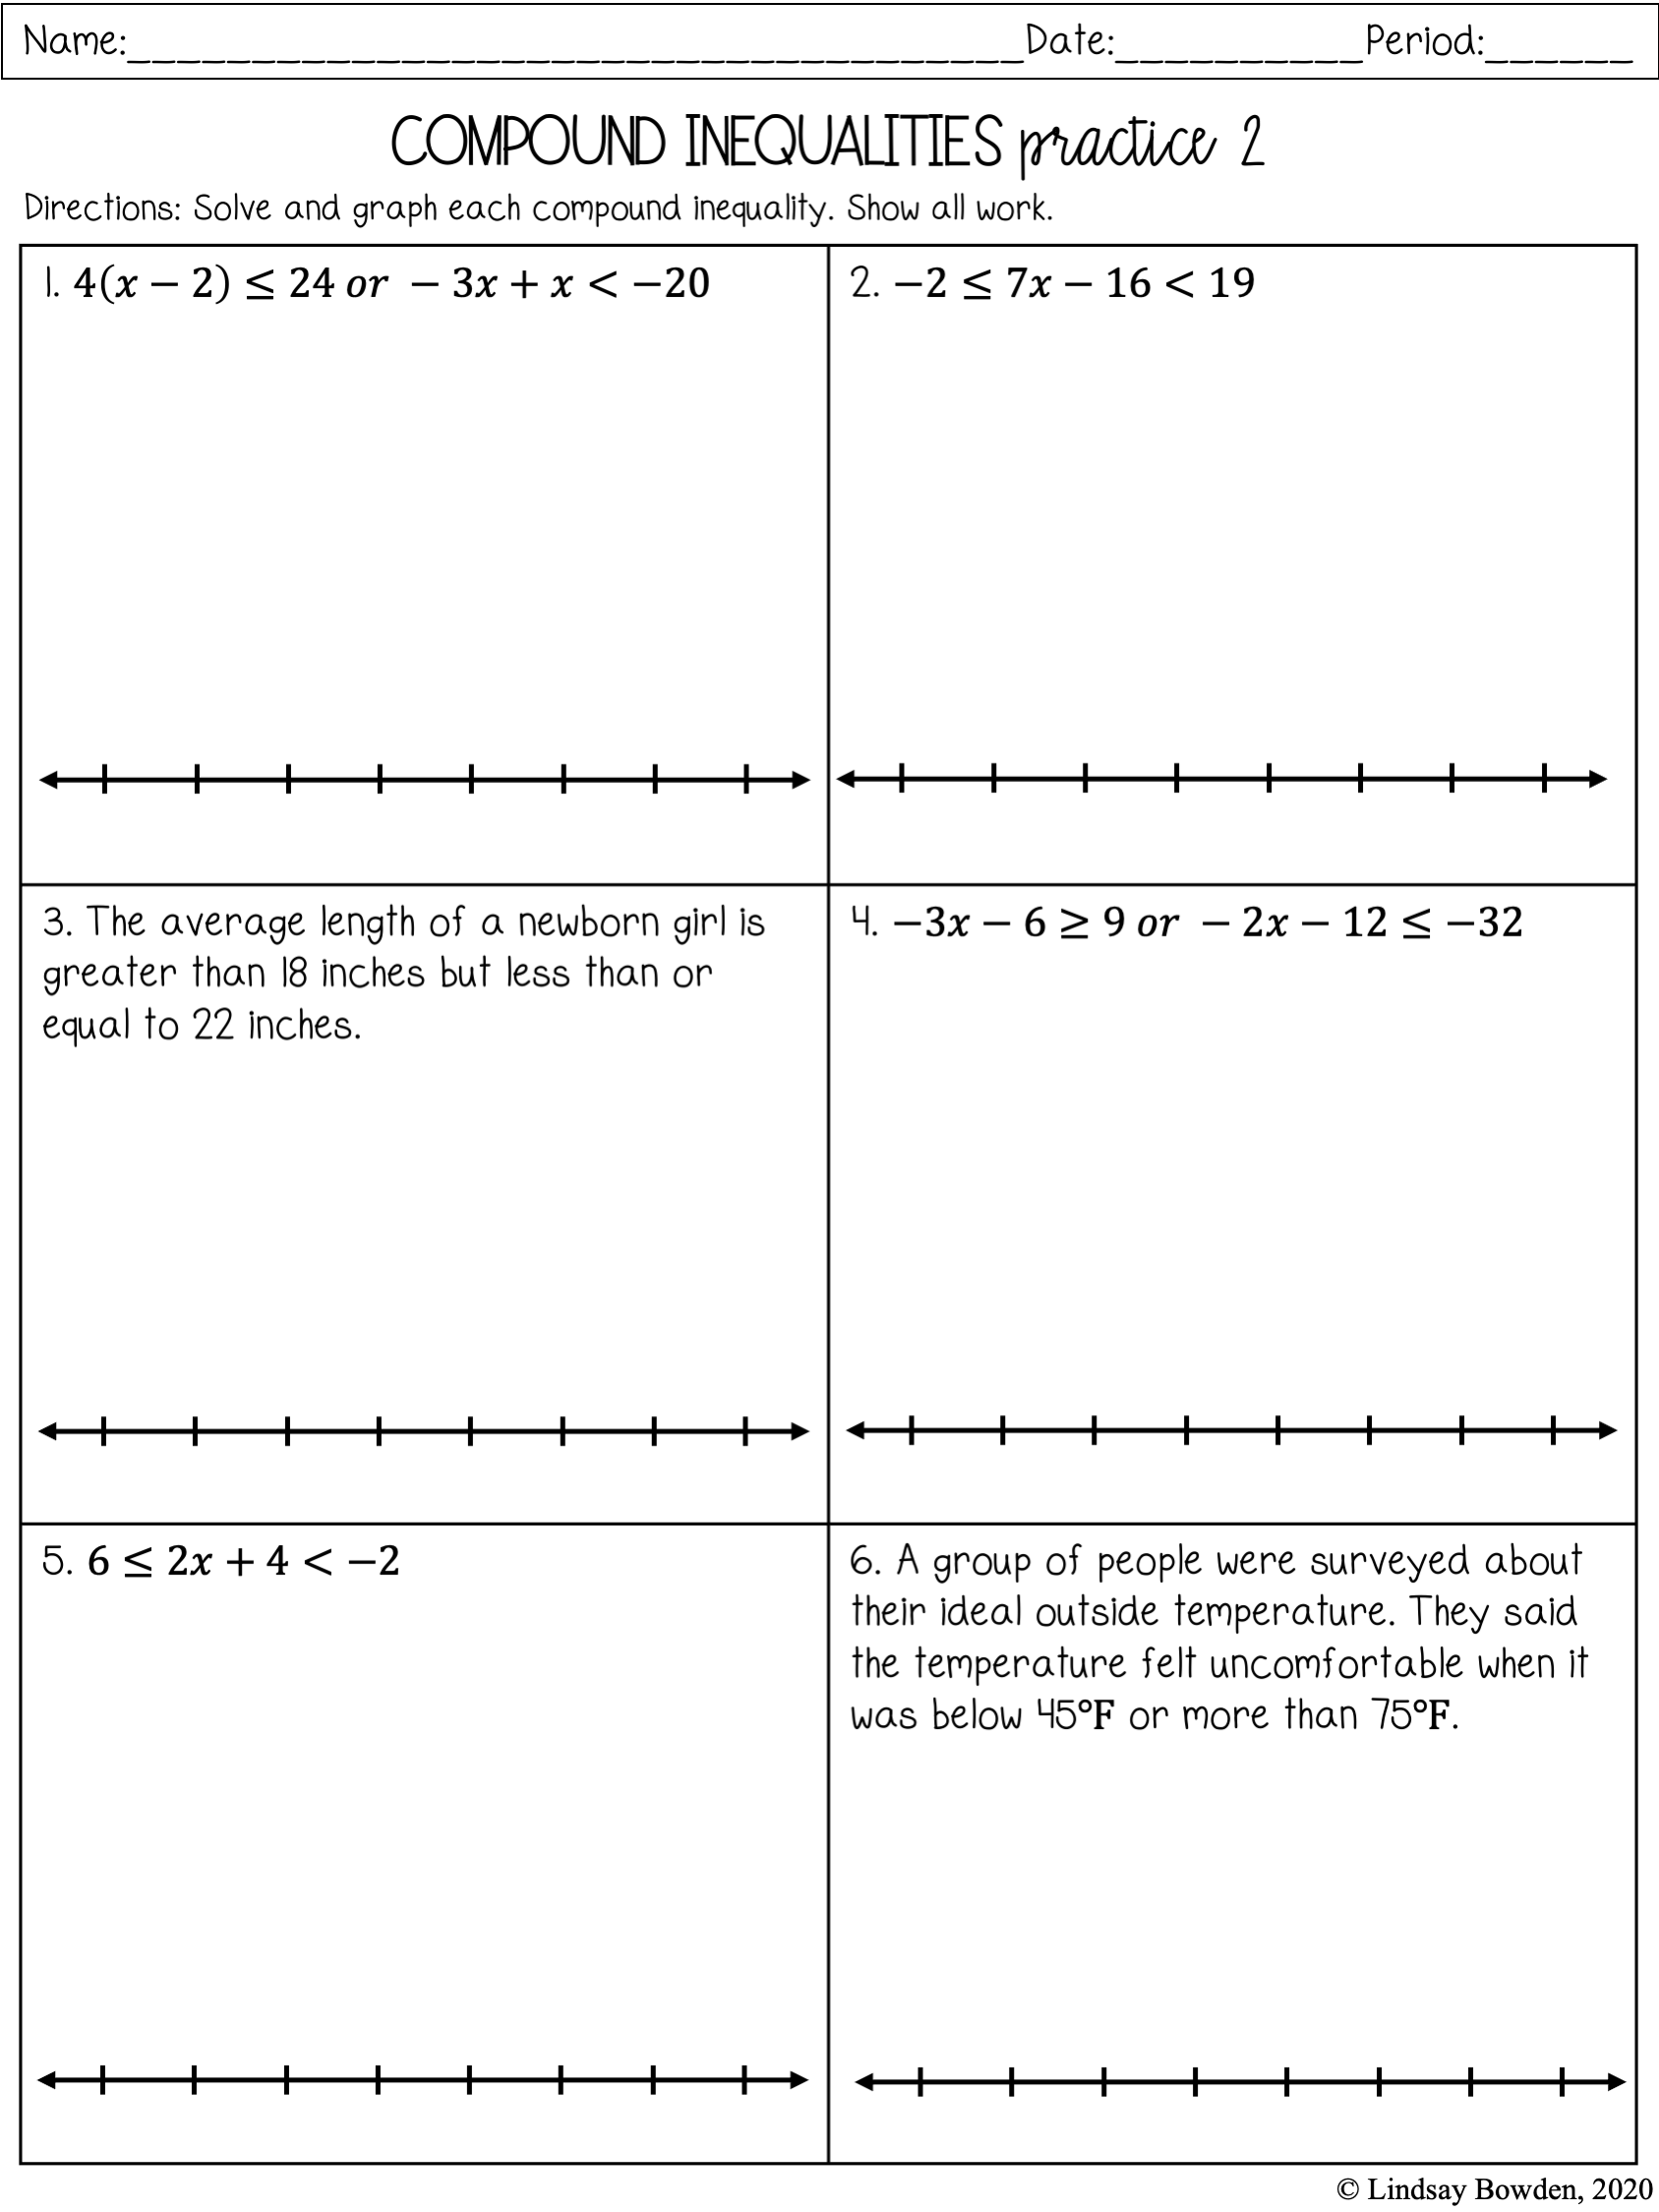 Compound Inequalities Notes and Worksheets - Lindsay Bowden Intended For Compound Inequalities Worksheet Answers